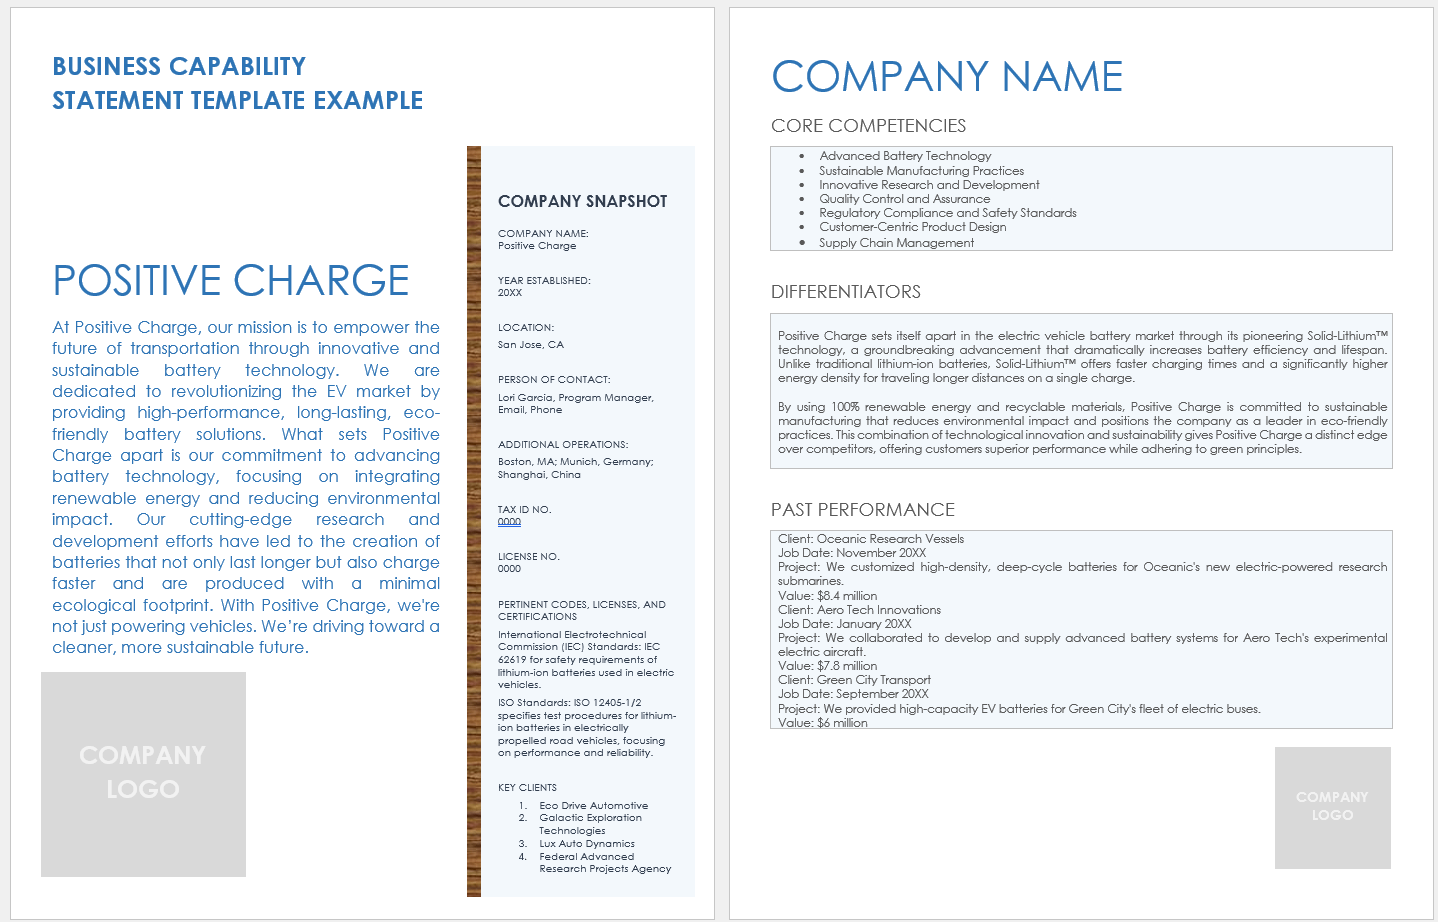 Business Capability Statement Template